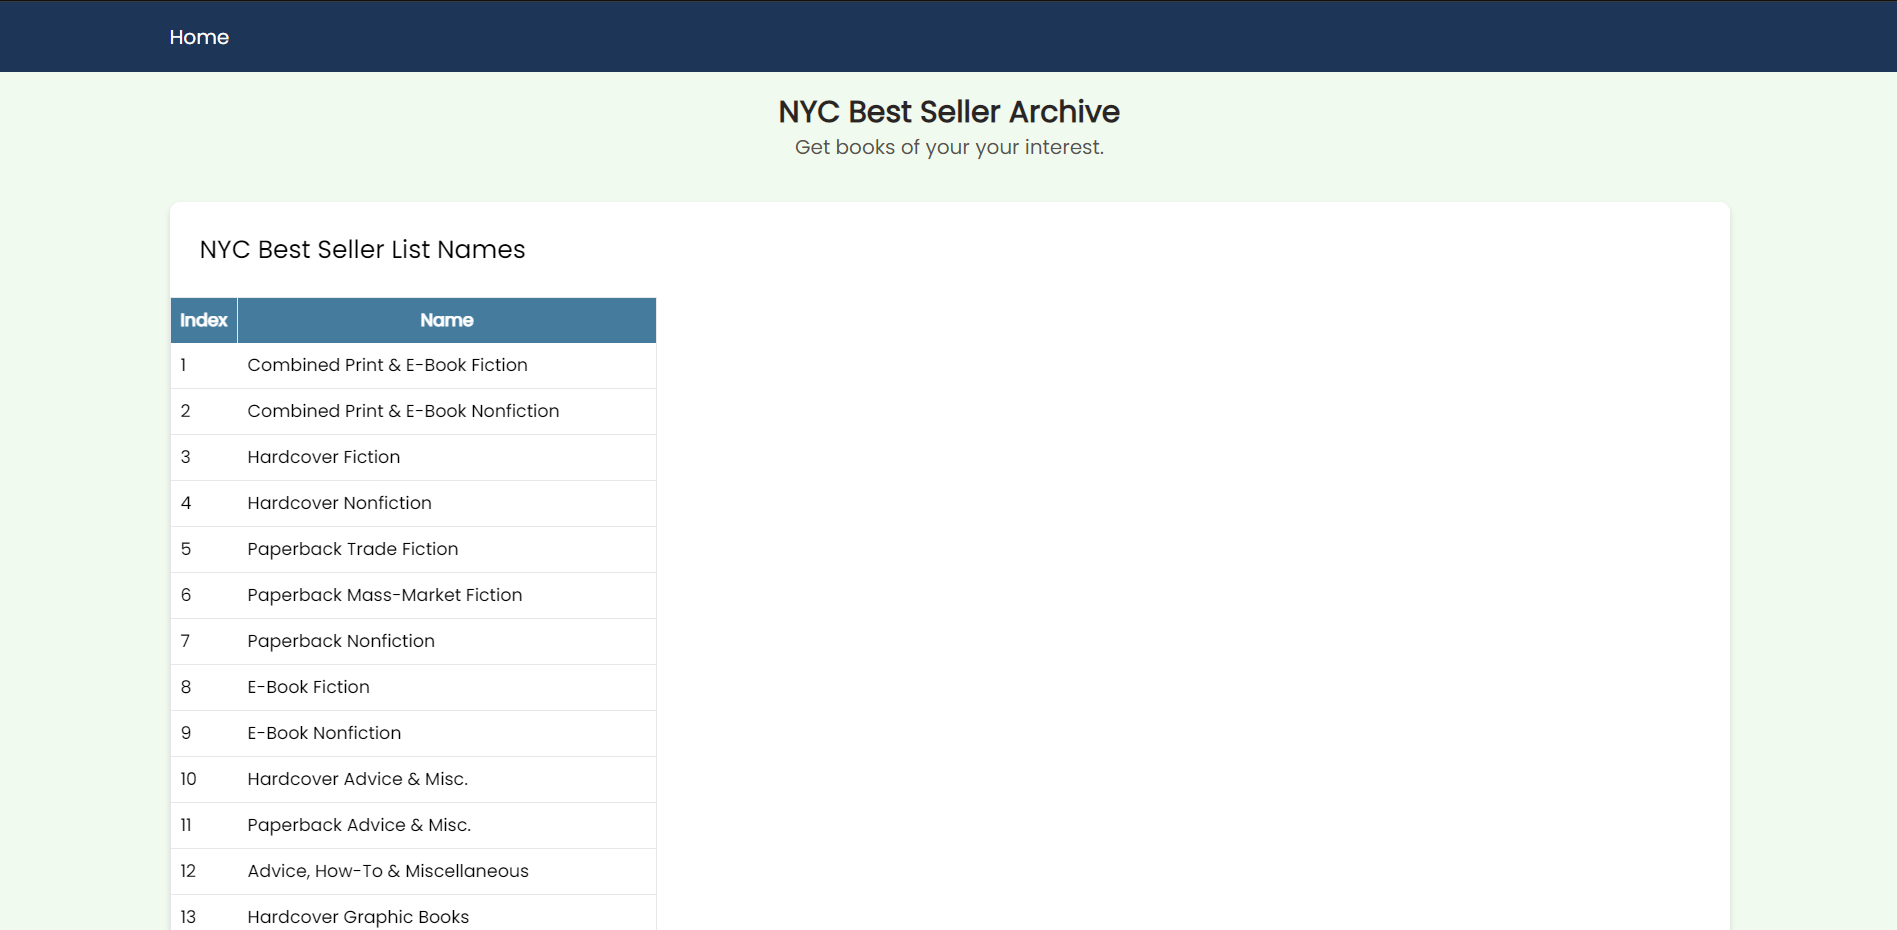 NY best seller archive list home page